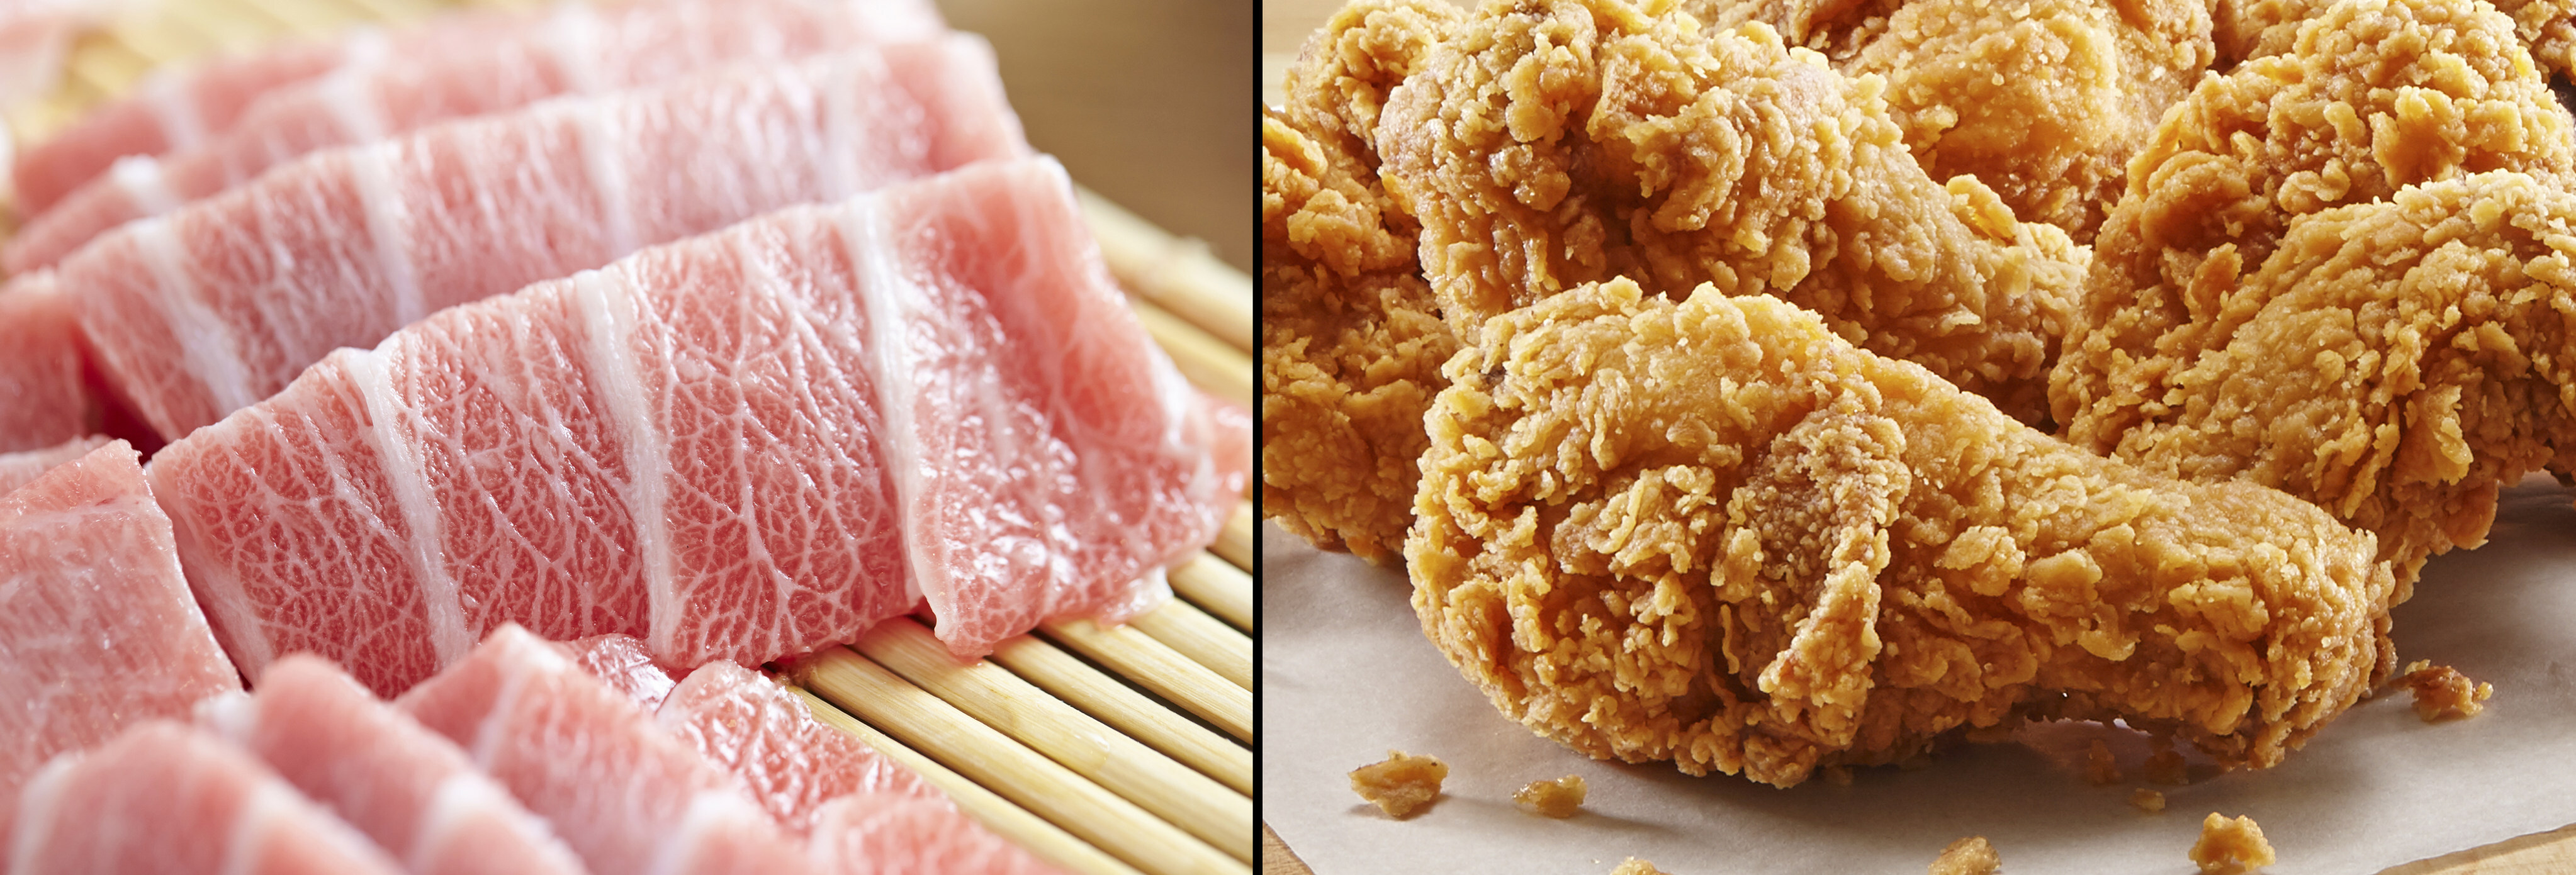 Macau restaurants are feeling the squeeze of the Covid-19 pandemic, with fewer customers, who also spend less - for example, ordering fried chicken when they previously would order toro sashimi. Photos: Shutterstock